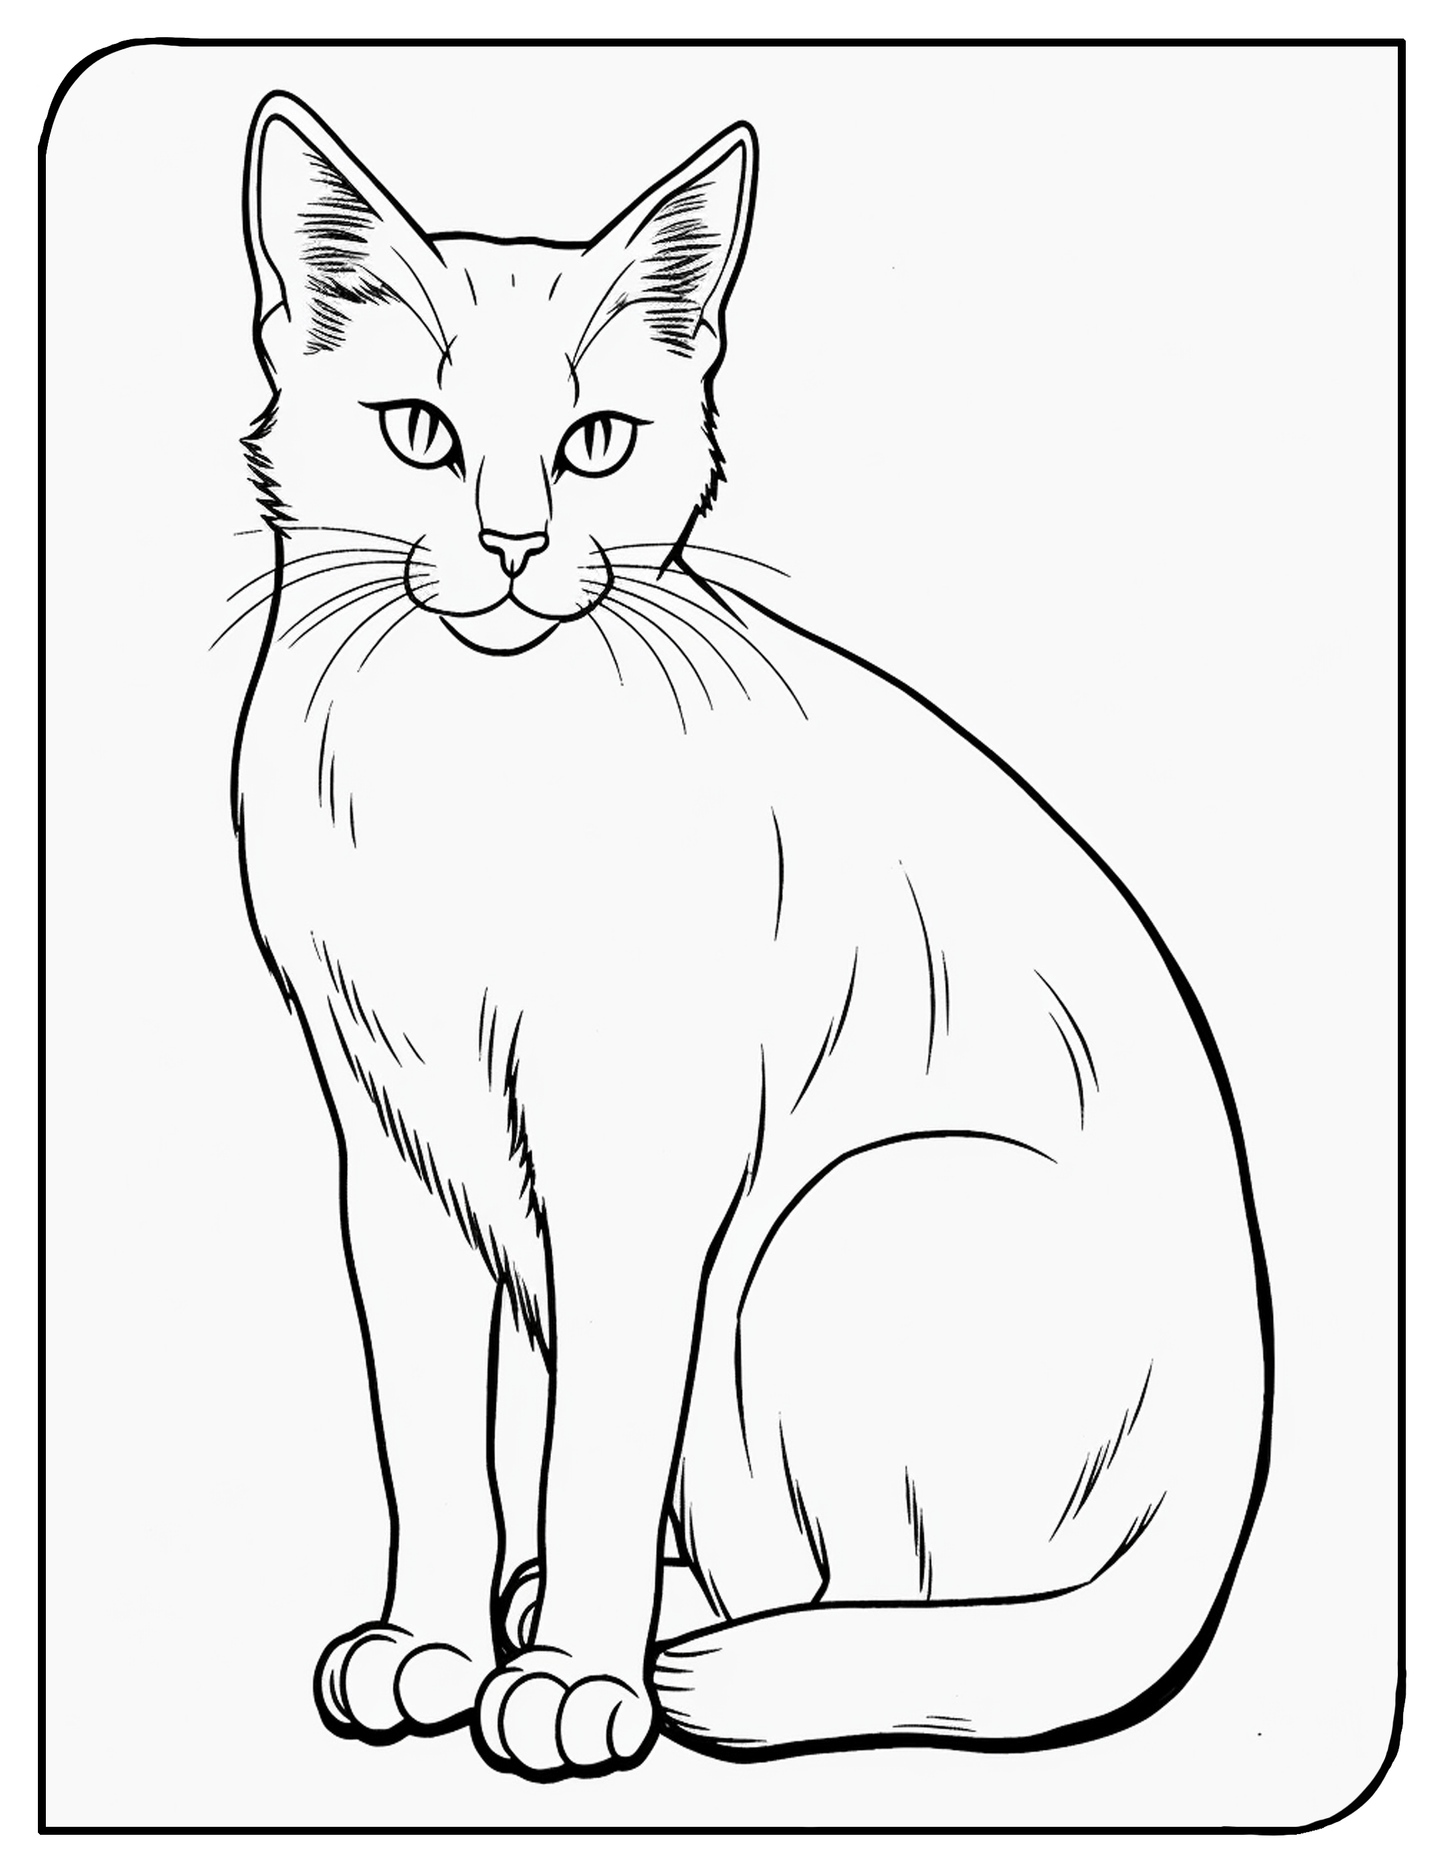 PETS Mini Coloring Book: Animal Coloring Pages - Pocket-sized and Travel Ready